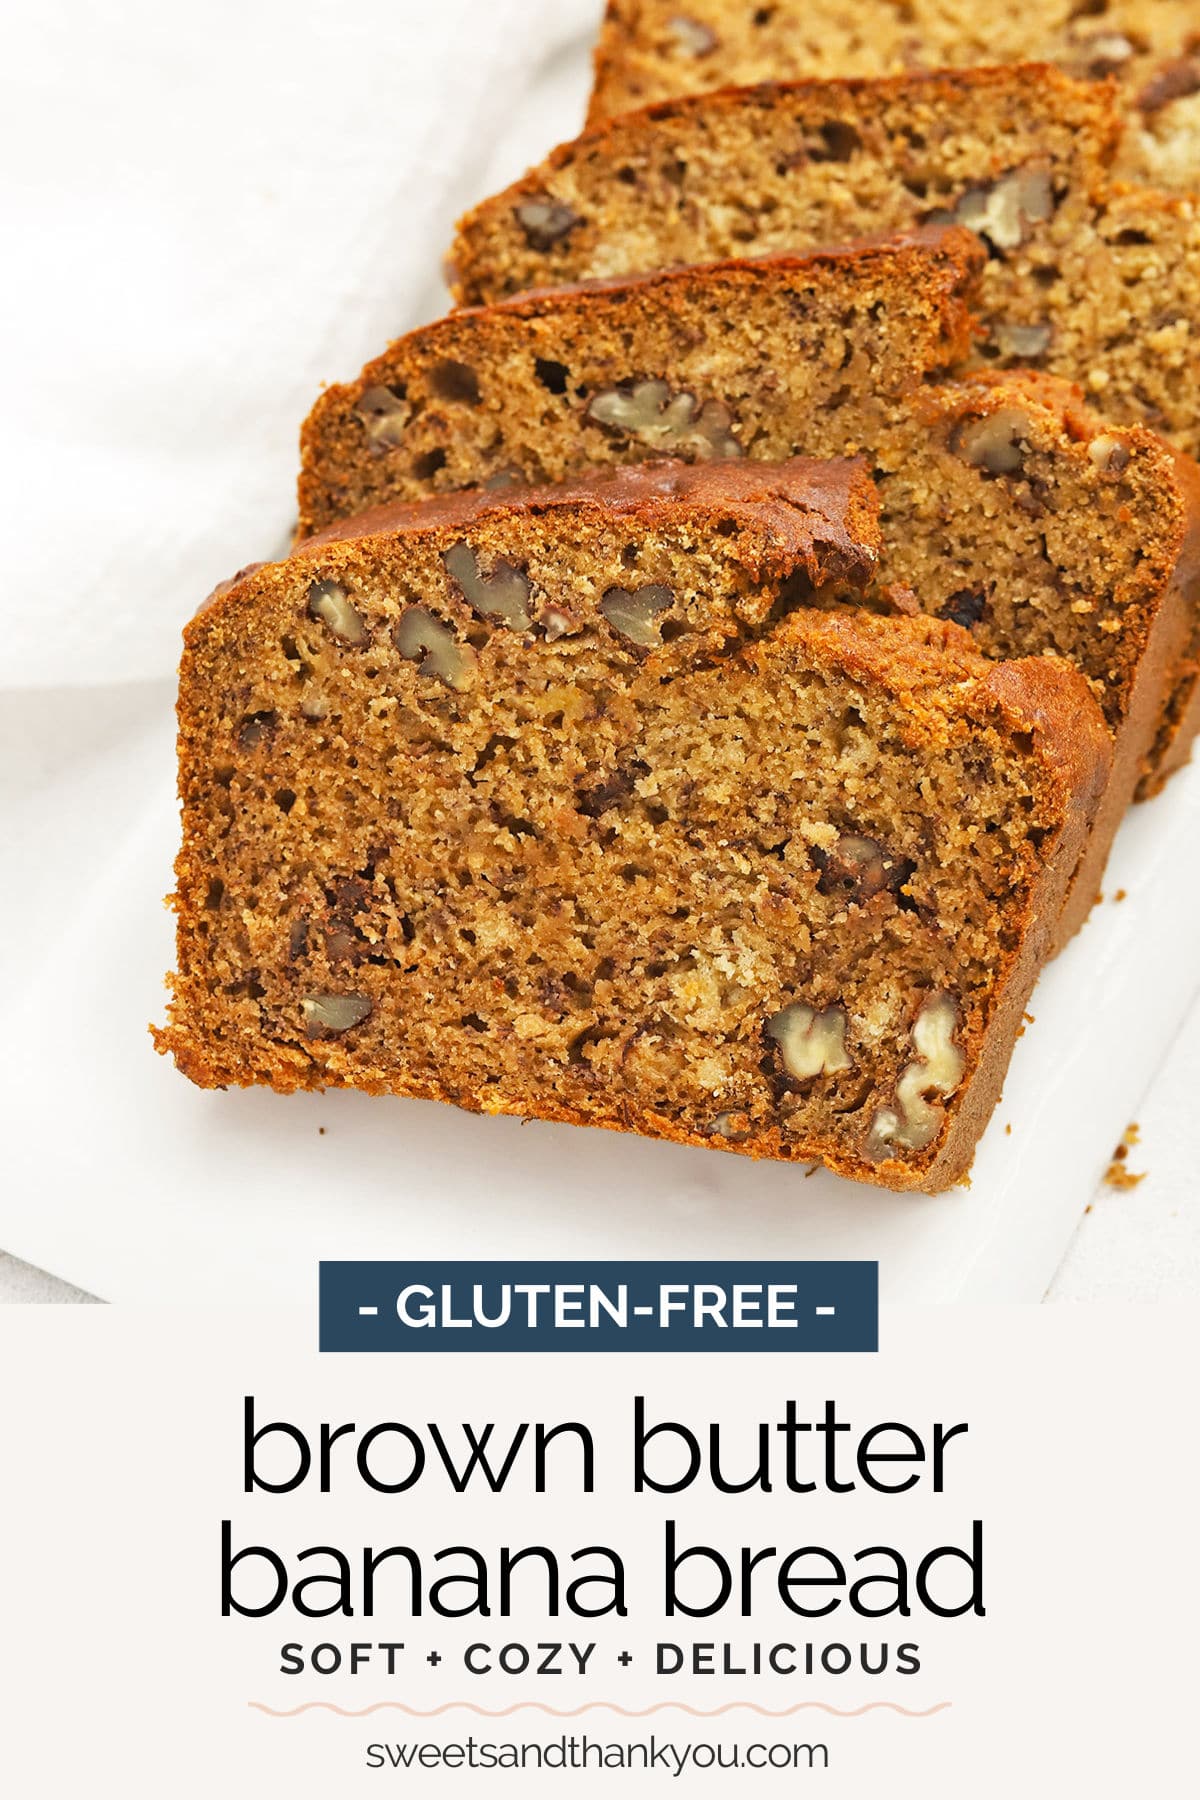 Gluten-Free Brown Butter Banana Bread - This amazing gluten-free banana bread recipe gives you tender, delicious banana bread every time. Laced with caramel-y flavors, it's delicious on its own, with nuts, or chocolate chips! // Brown Butter Banana Bread Recipe // Gluten Free Banana Bread // #bananabread #glutenfree #brownbutter 